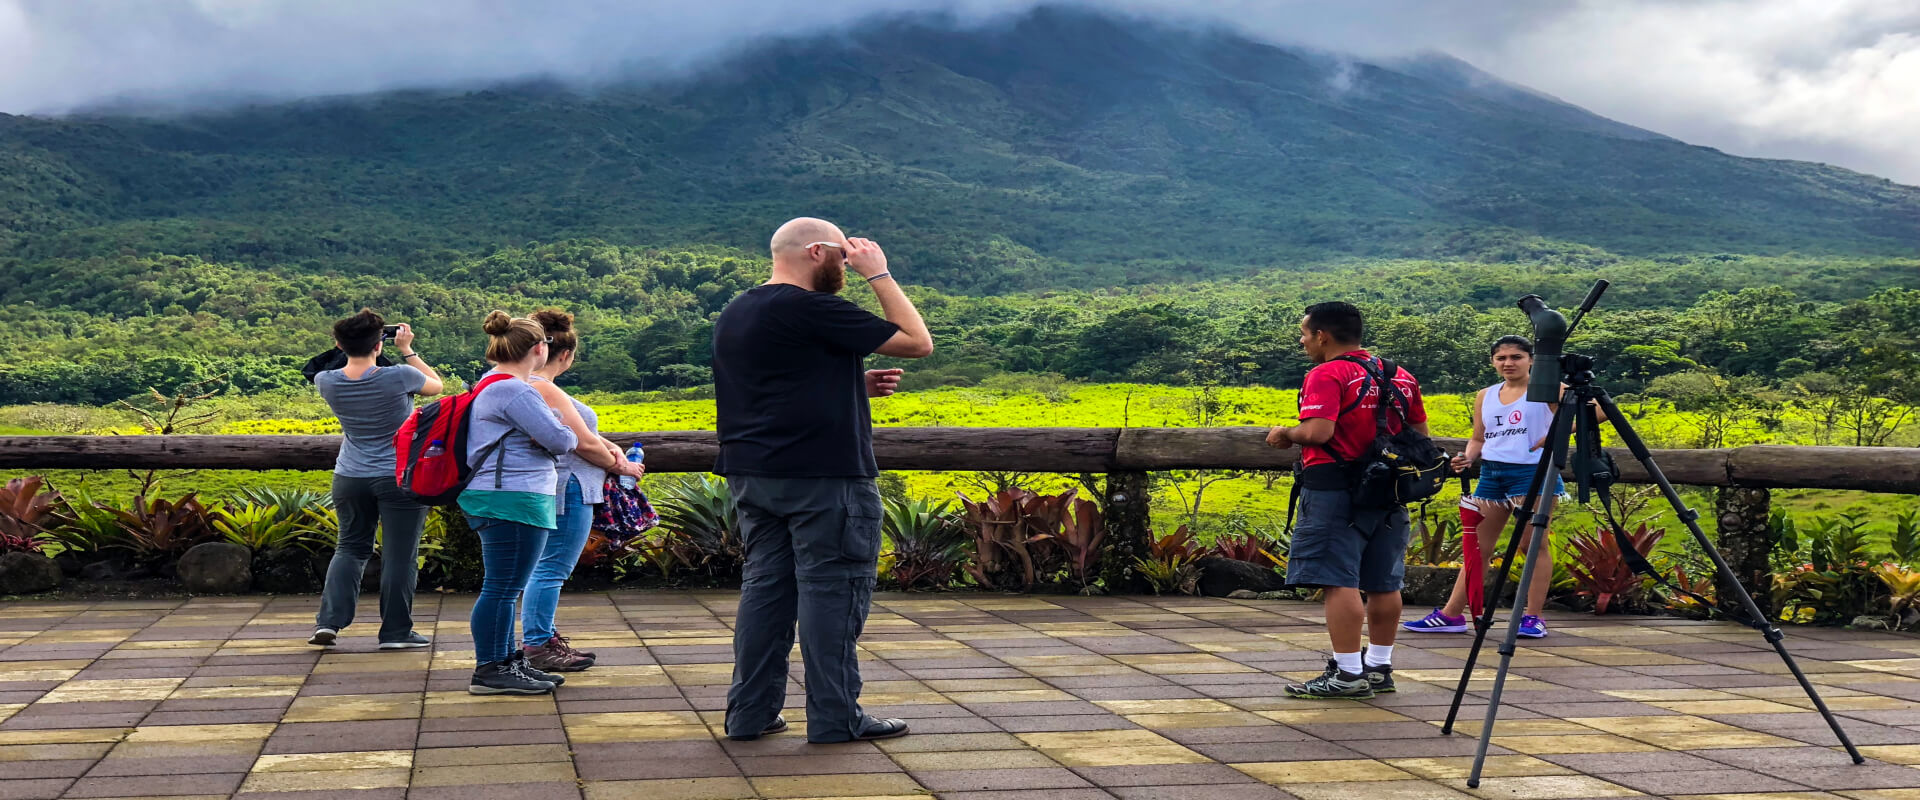 Arenal Volcano National Park and Arenal Reserve Guided Hike | Costa Rica Jade Tours